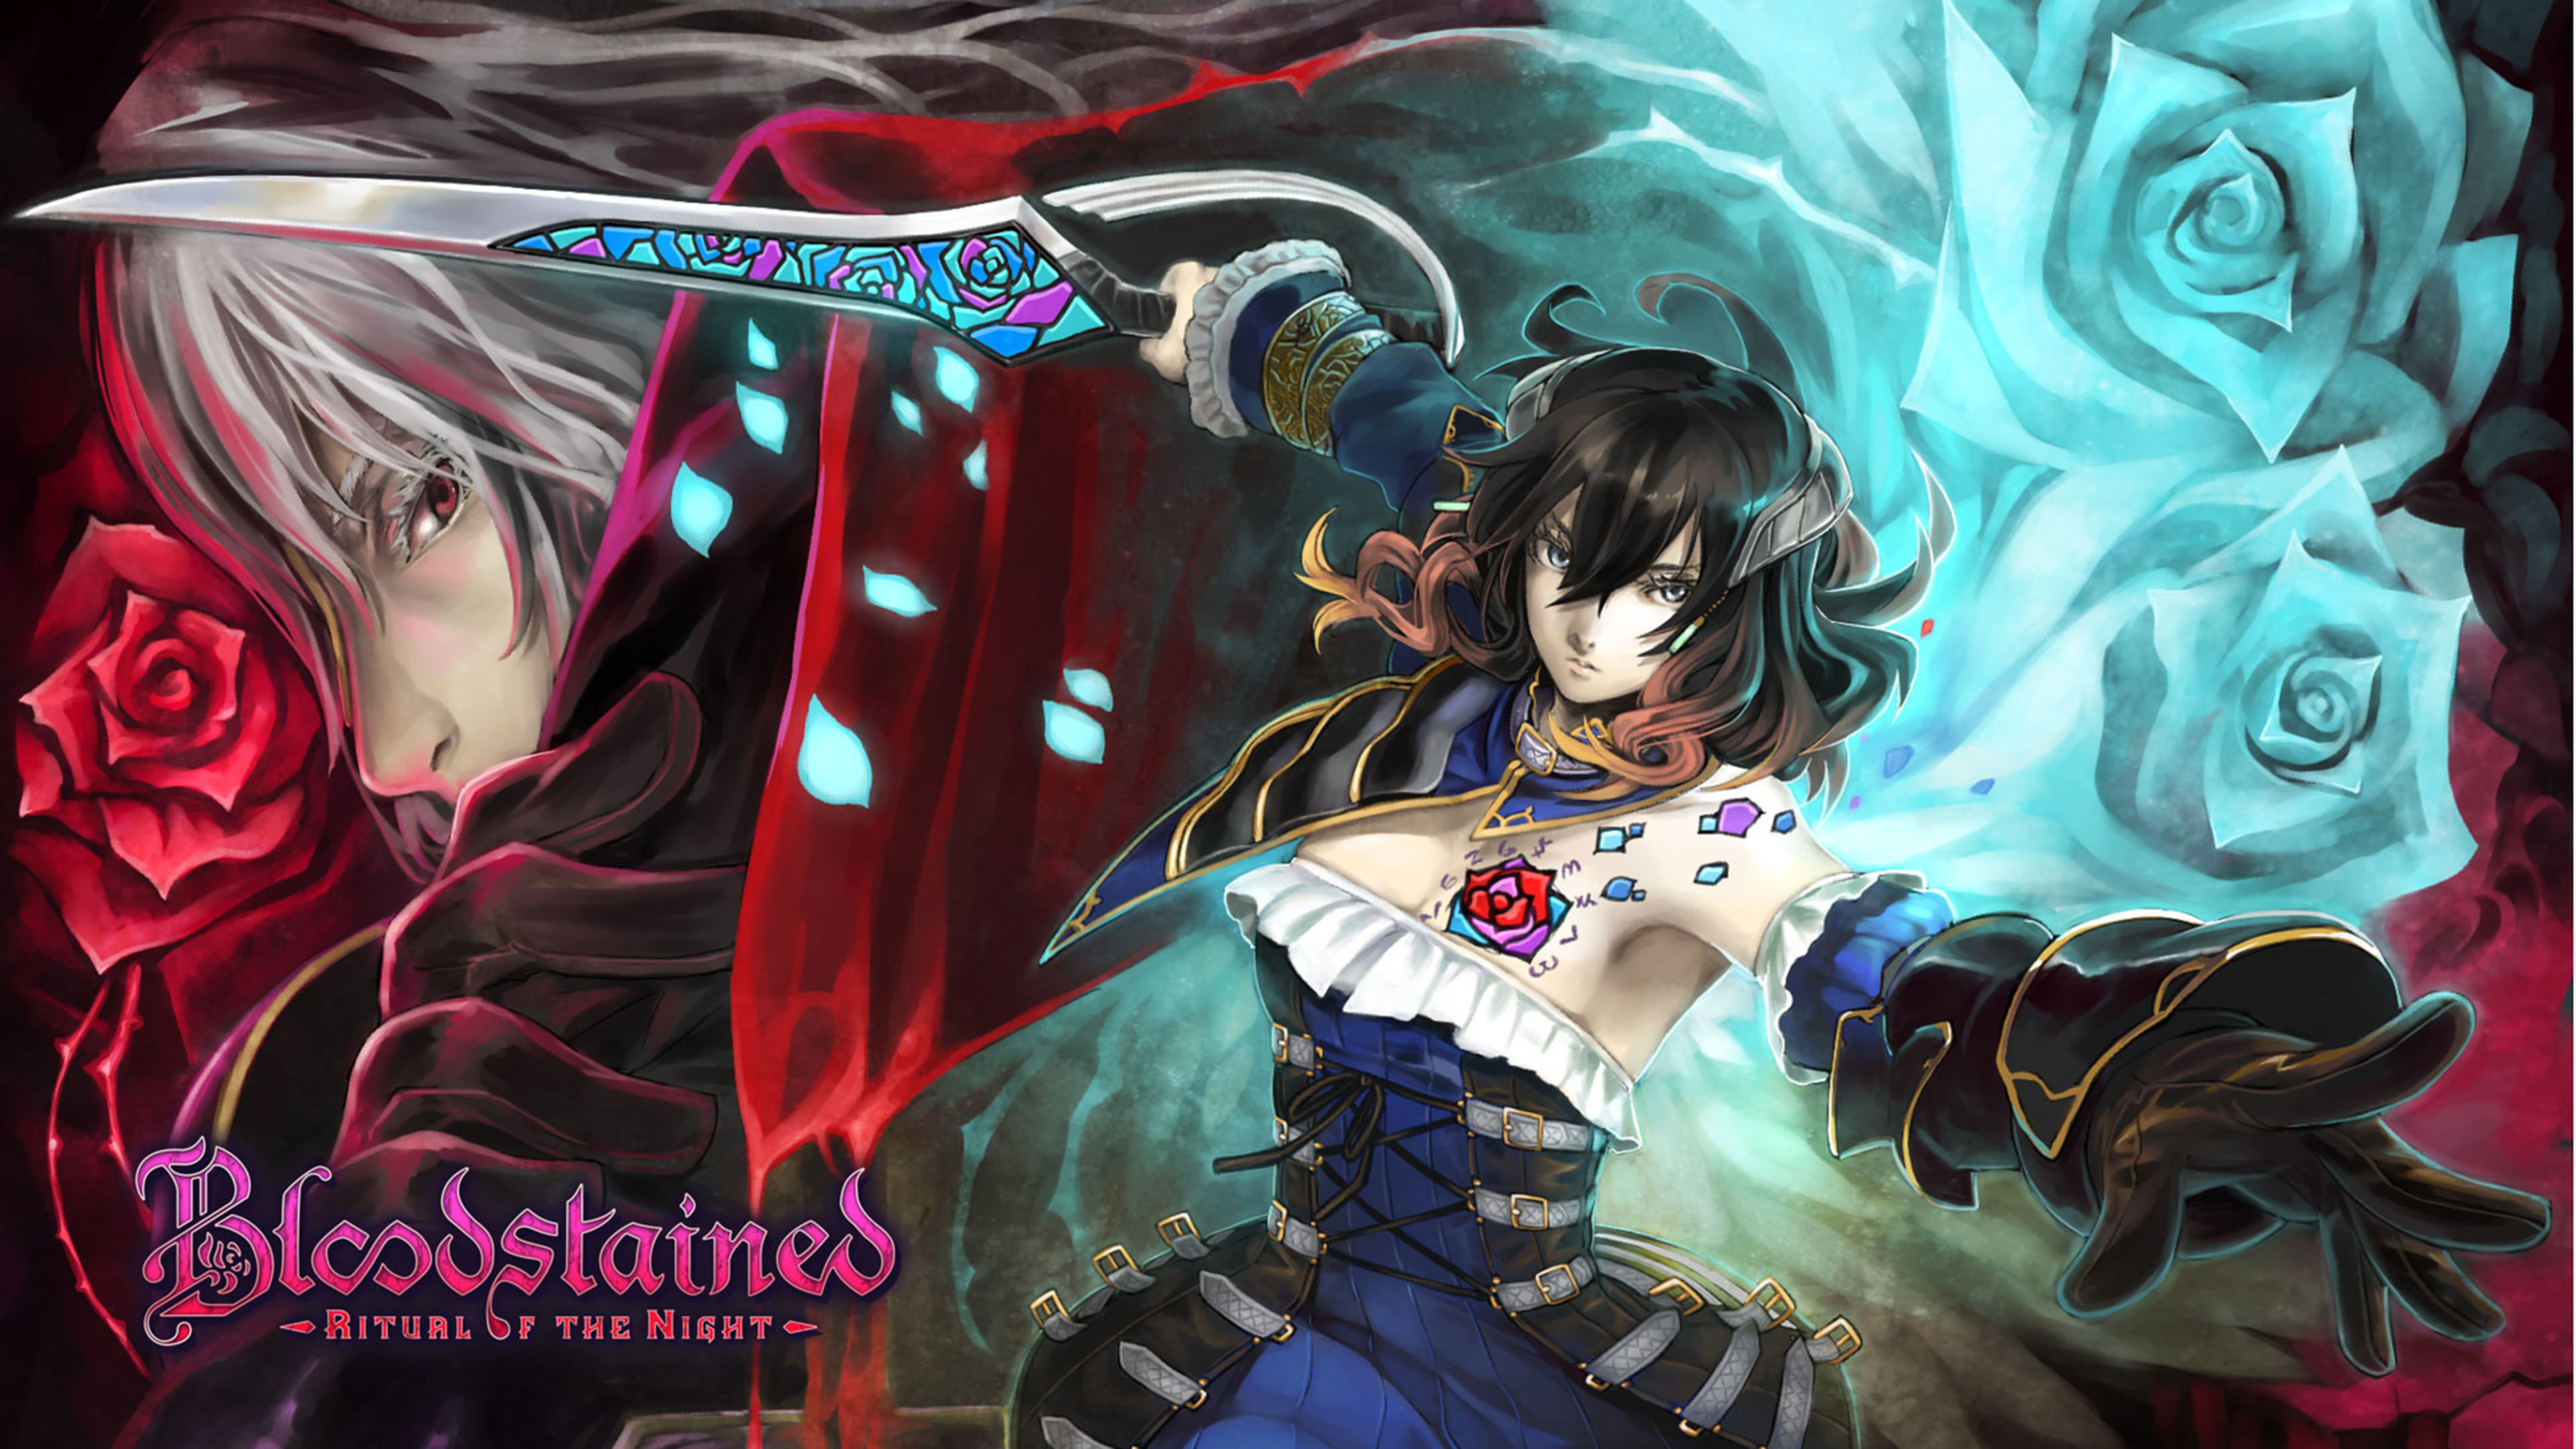 3840x2160 Bloodstained Ritual of the Night 4K Wallpaper ...